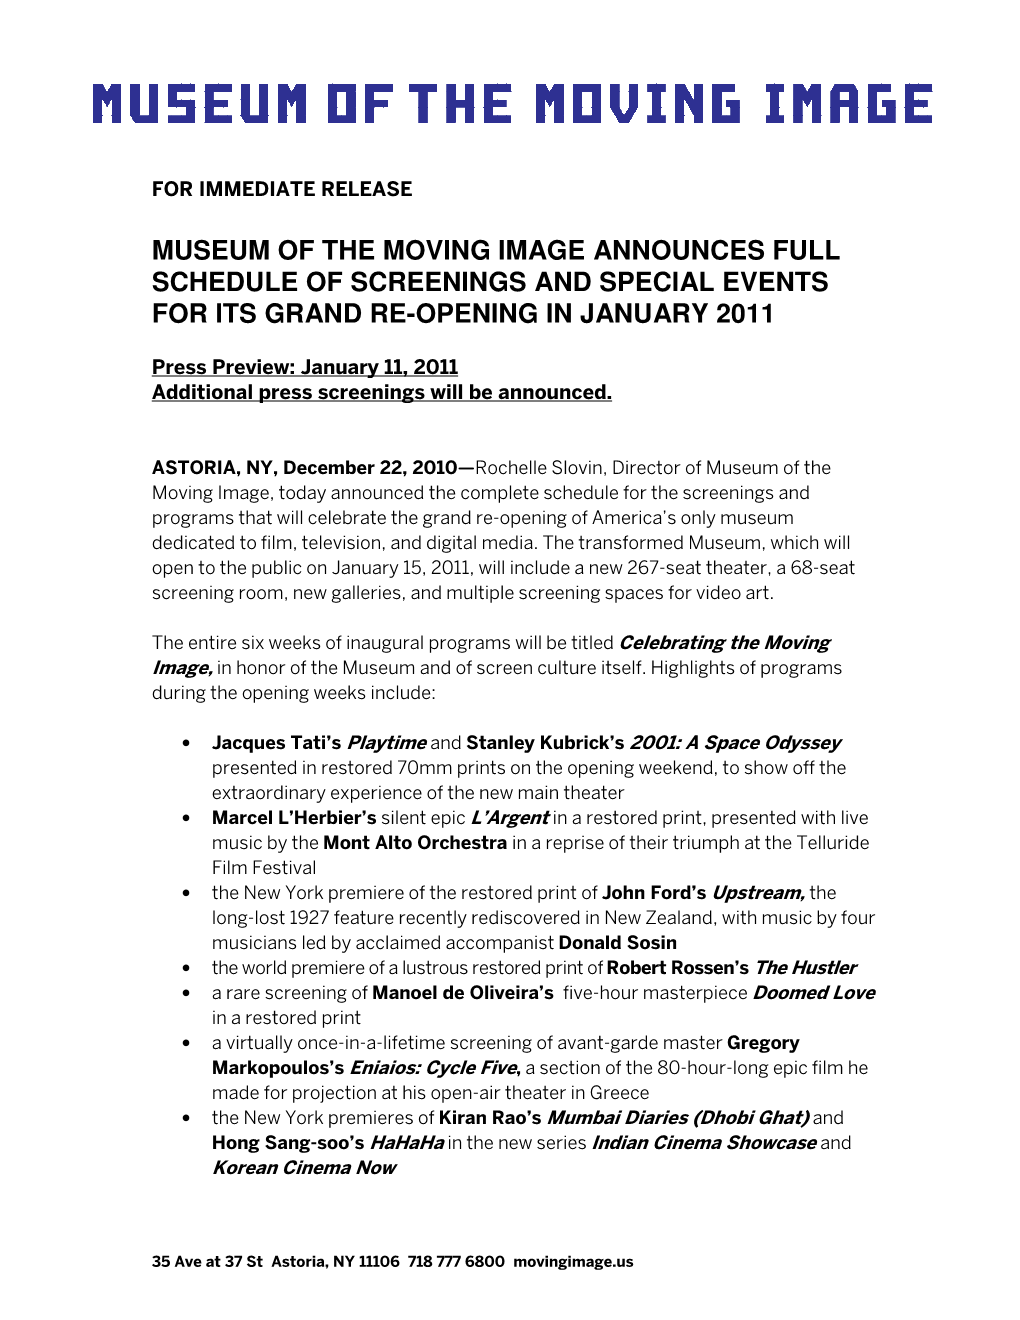 Museum of the Moving Image Announces Full Schedule of Screenings and Special Events for Its Grand Re-Opening in January 2011